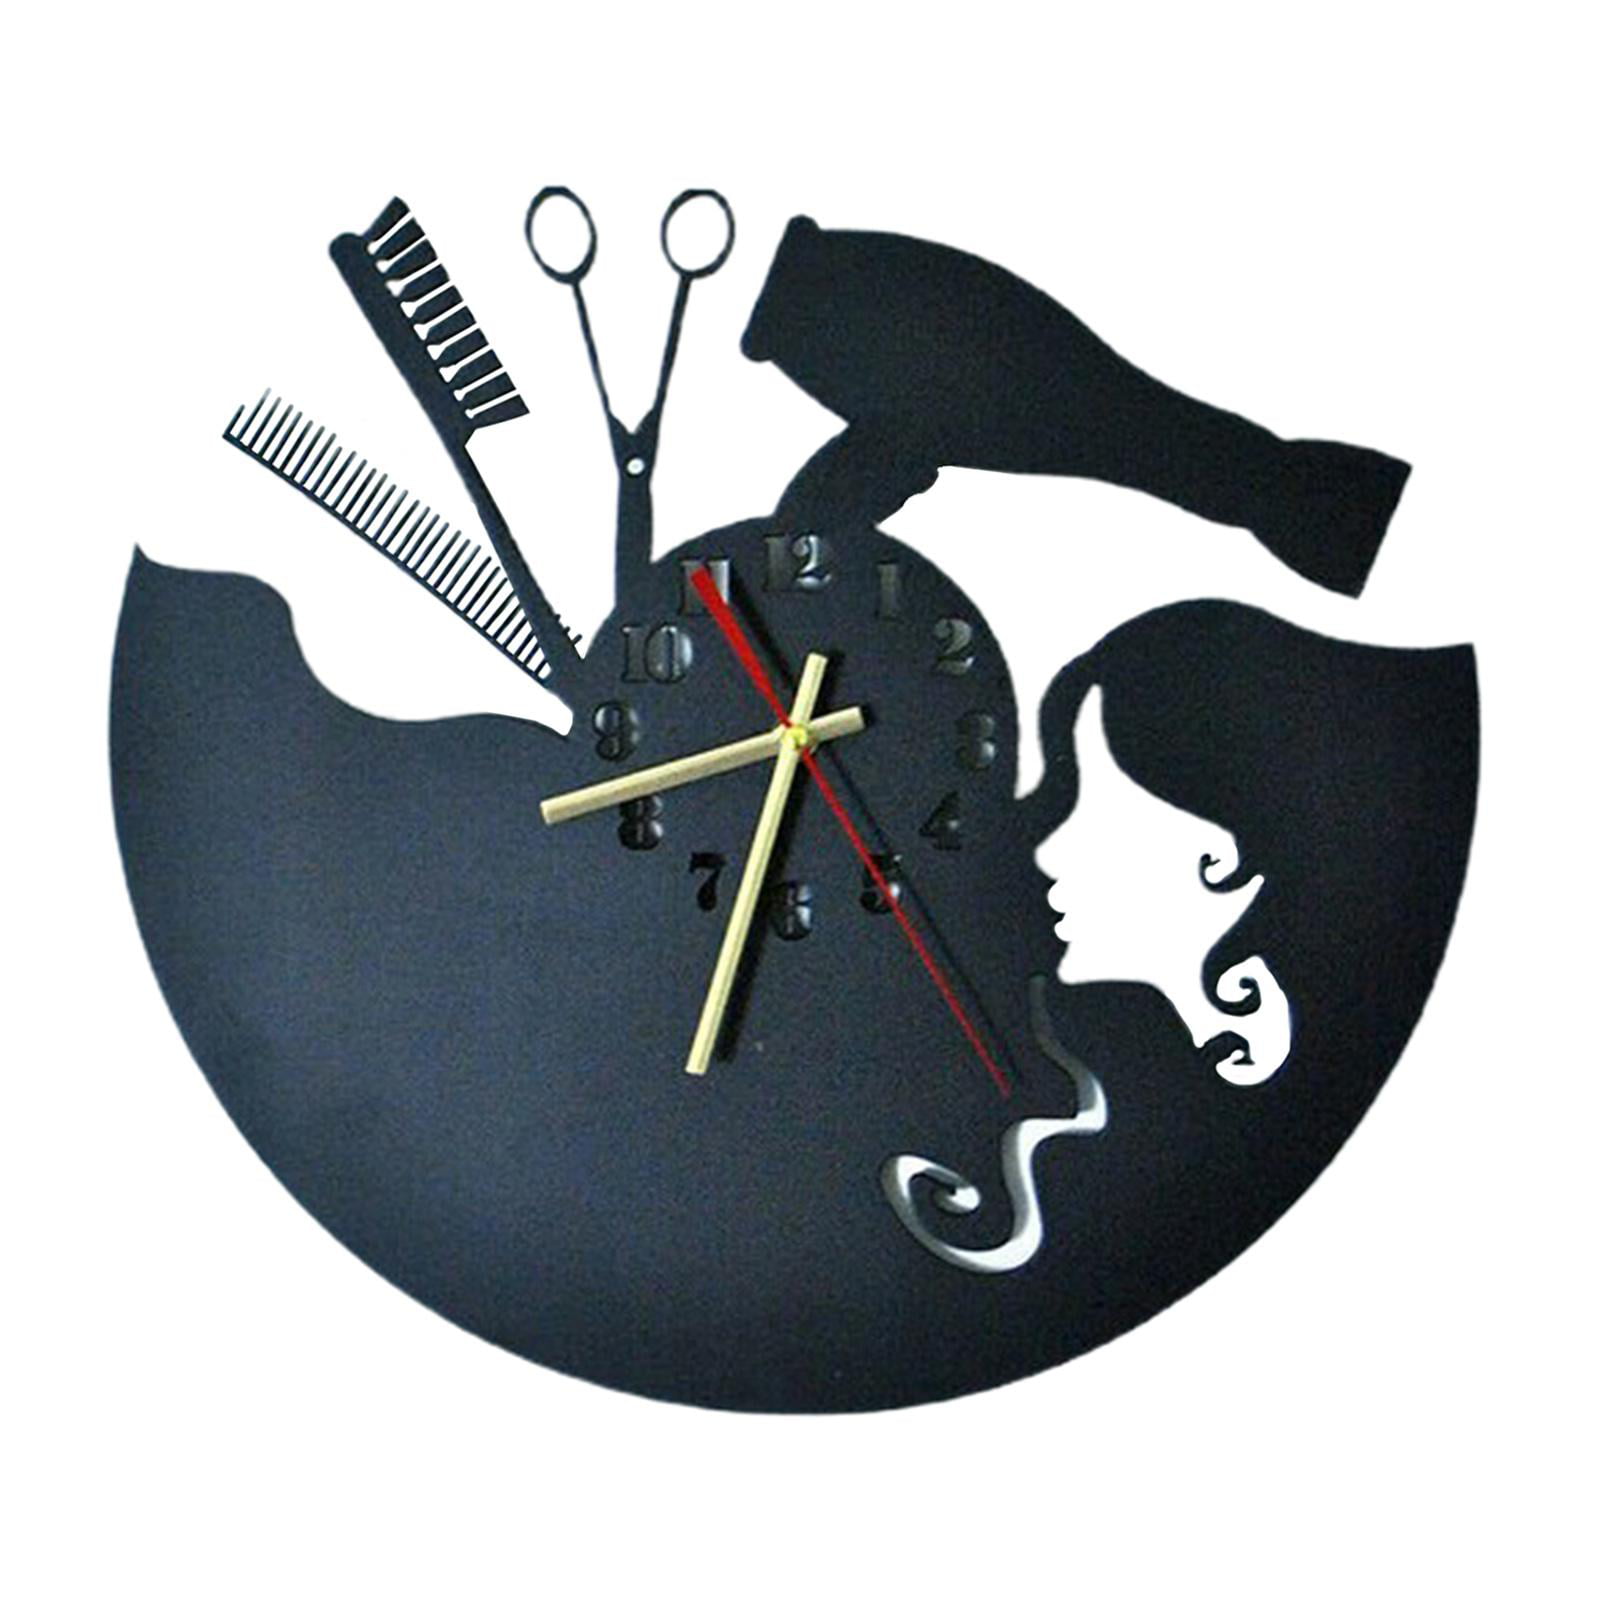 MagiDeal Hairdresser Wall Clock Wood Battery Operated Retro for Art Decorations Classroom Home Office